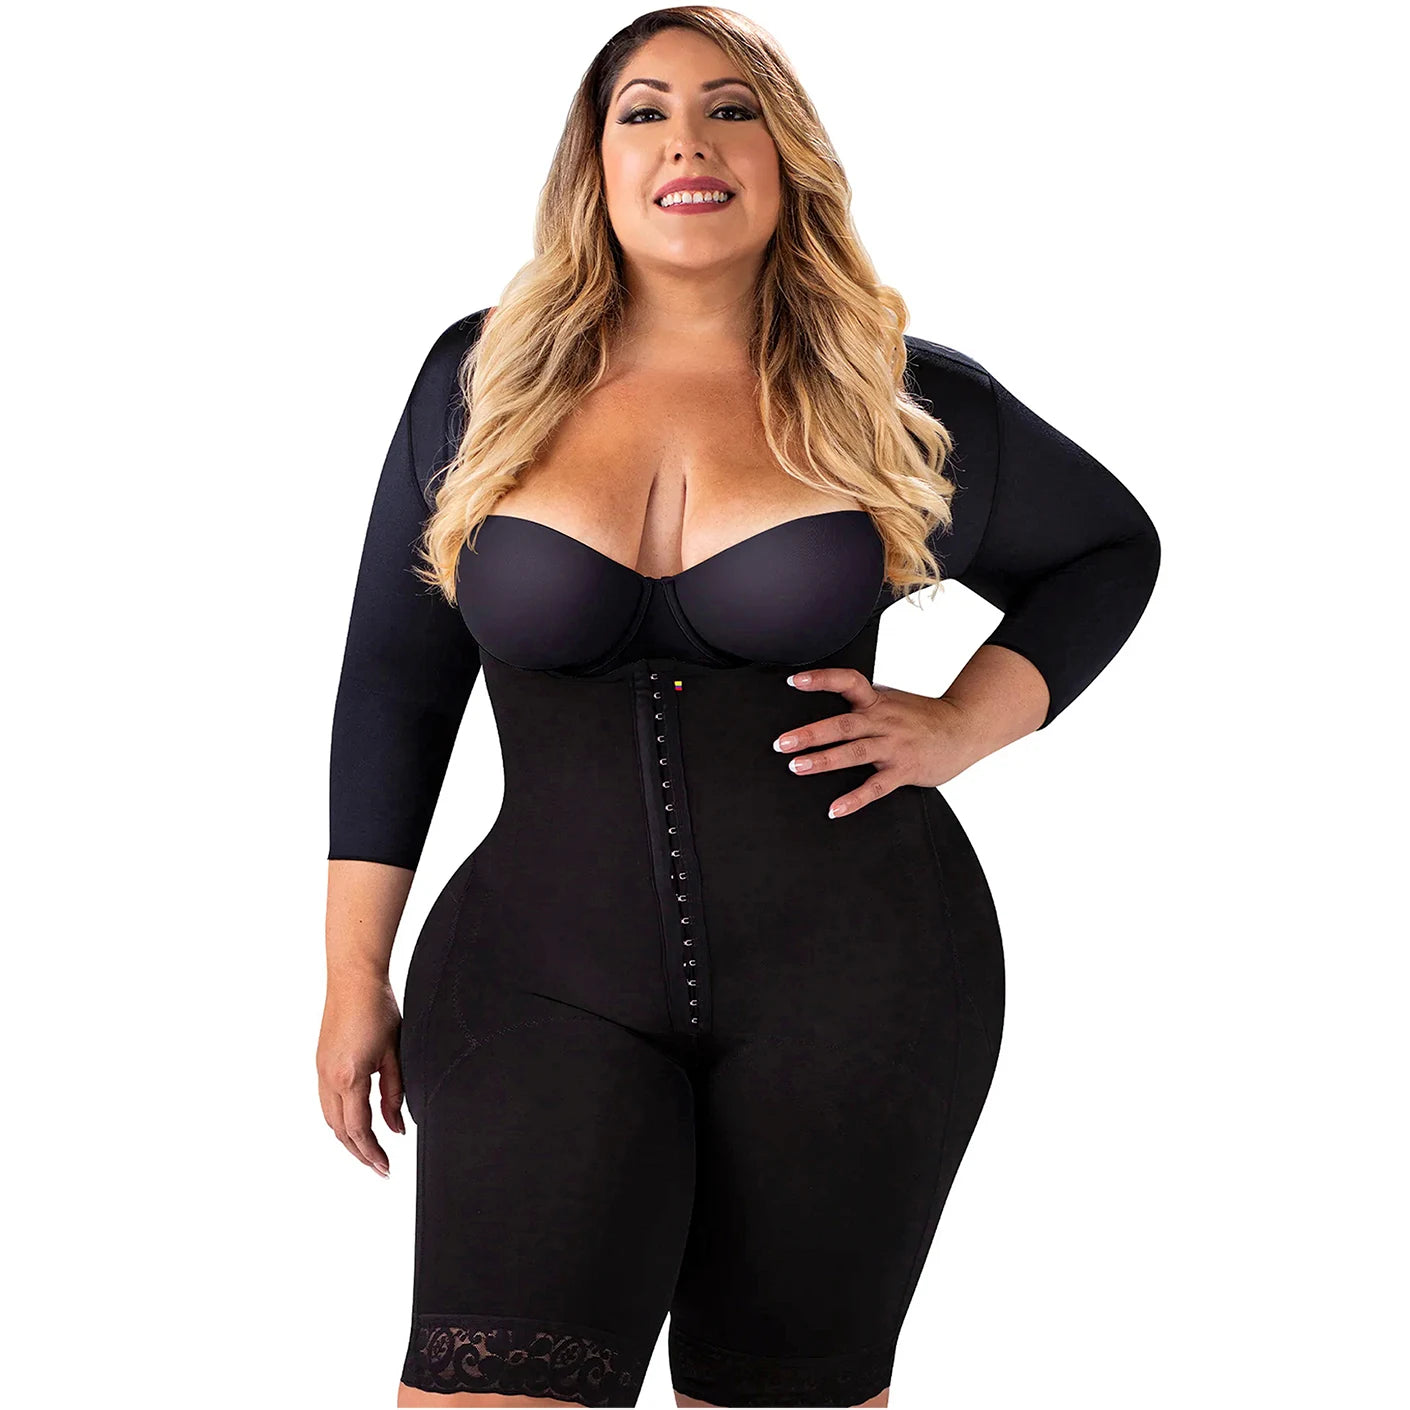 Real Curvy Women Fajas Colombianas Compression Top S, M, L, XL 1112